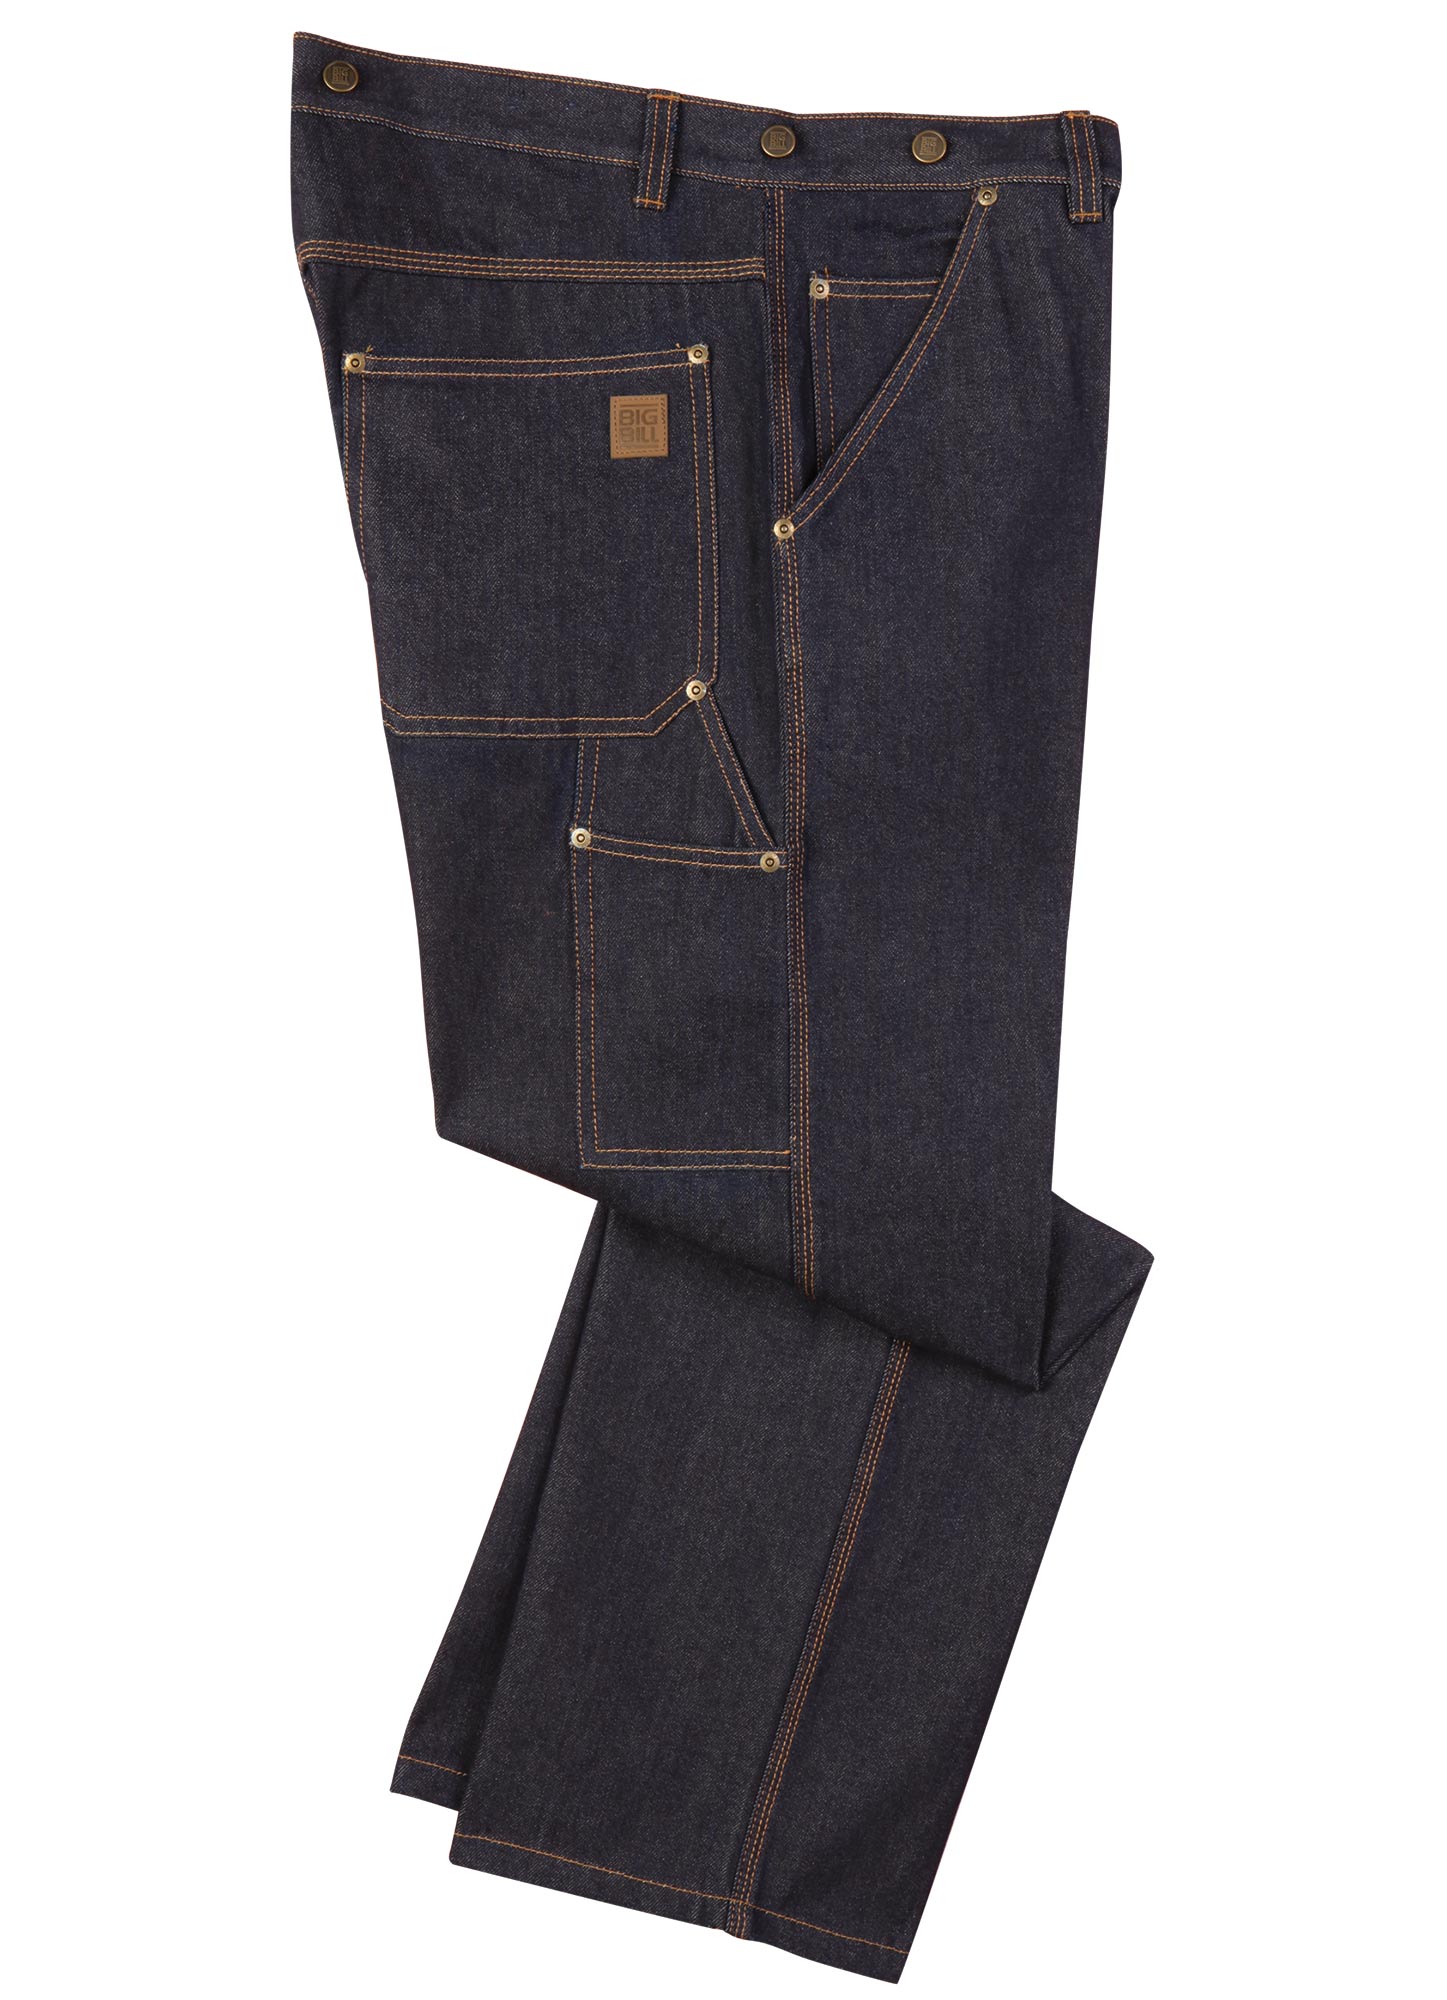 logger pants with suspender buttons